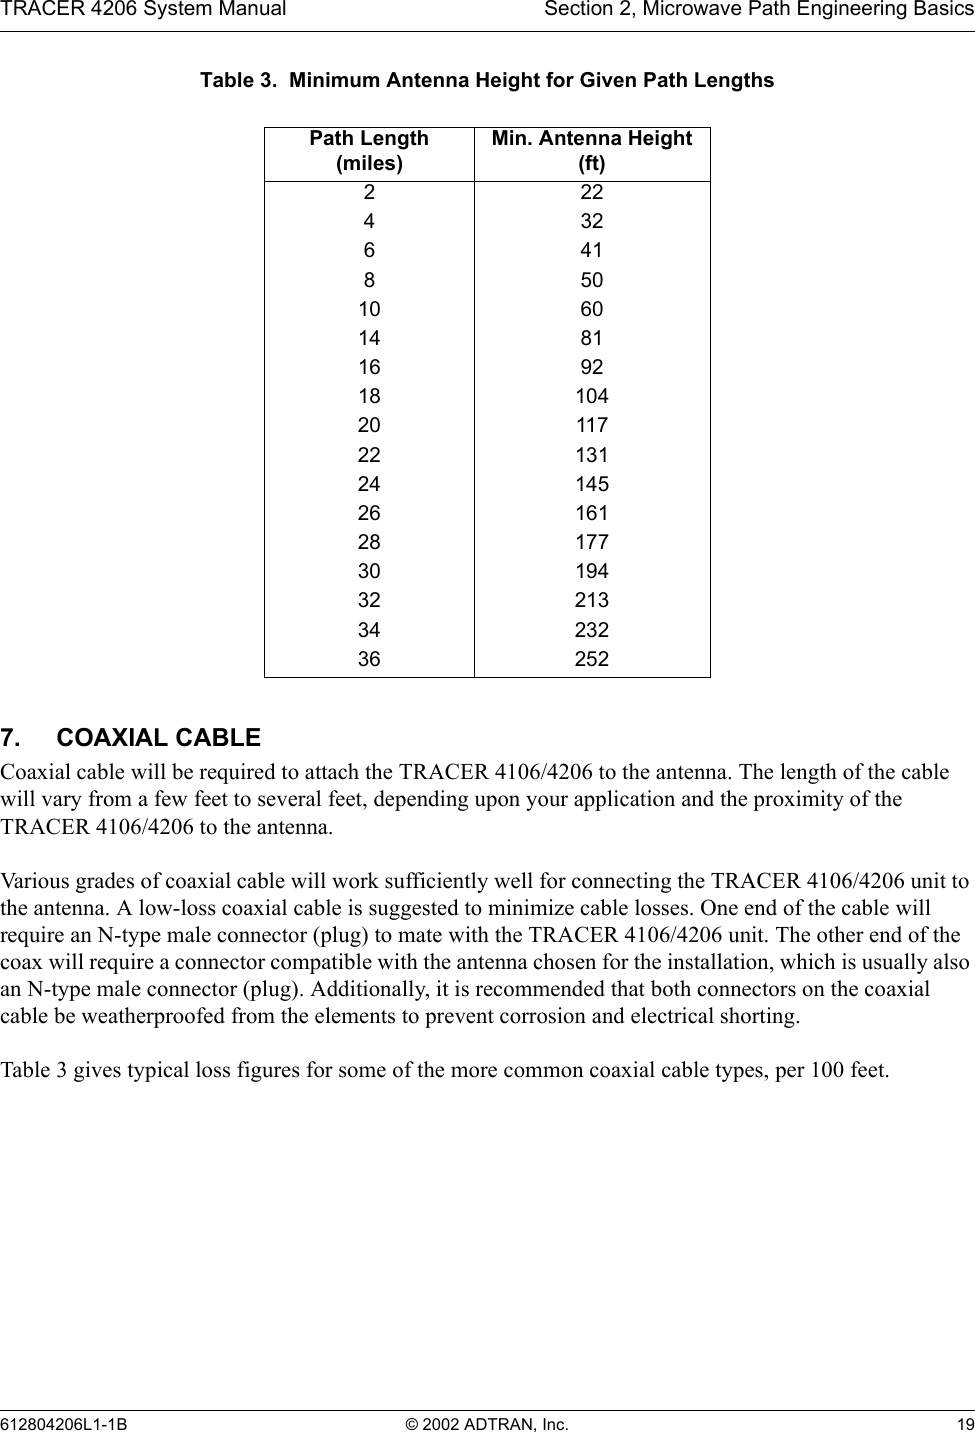 TRACER 4206 System Manual Section 2, Microwave Path Engineering Basics612804206L1-1B © 2002 ADTRAN, Inc. 19Table 3.  Minimum Antenna Height for Given Path Lengths7. COAXIAL CABLECoaxial cable will be required to attach the TRACER 4106/4206 to the antenna. The length of the cable will vary from a few feet to several feet, depending upon your application and the proximity of the TRACER 4106/4206 to the antenna.Various grades of coaxial cable will work sufficiently well for connecting the TRACER 4106/4206 unit to the antenna. A low-loss coaxial cable is suggested to minimize cable losses. One end of the cable will require an N-type male connector (plug) to mate with the TRACER 4106/4206 unit. The other end of the coax will require a connector compatible with the antenna chosen for the installation, which is usually also an N-type male connector (plug). Additionally, it is recommended that both connectors on the coaxial cable be weatherproofed from the elements to prevent corrosion and electrical shorting.Table 3 gives typical loss figures for some of the more common coaxial cable types, per 100 feet.Path Length(miles)Min. Antenna Height(ft)22243264185010 6014 8116 9218 10420 11722 13124 14526 16128 17730 19432 21334 23236 252